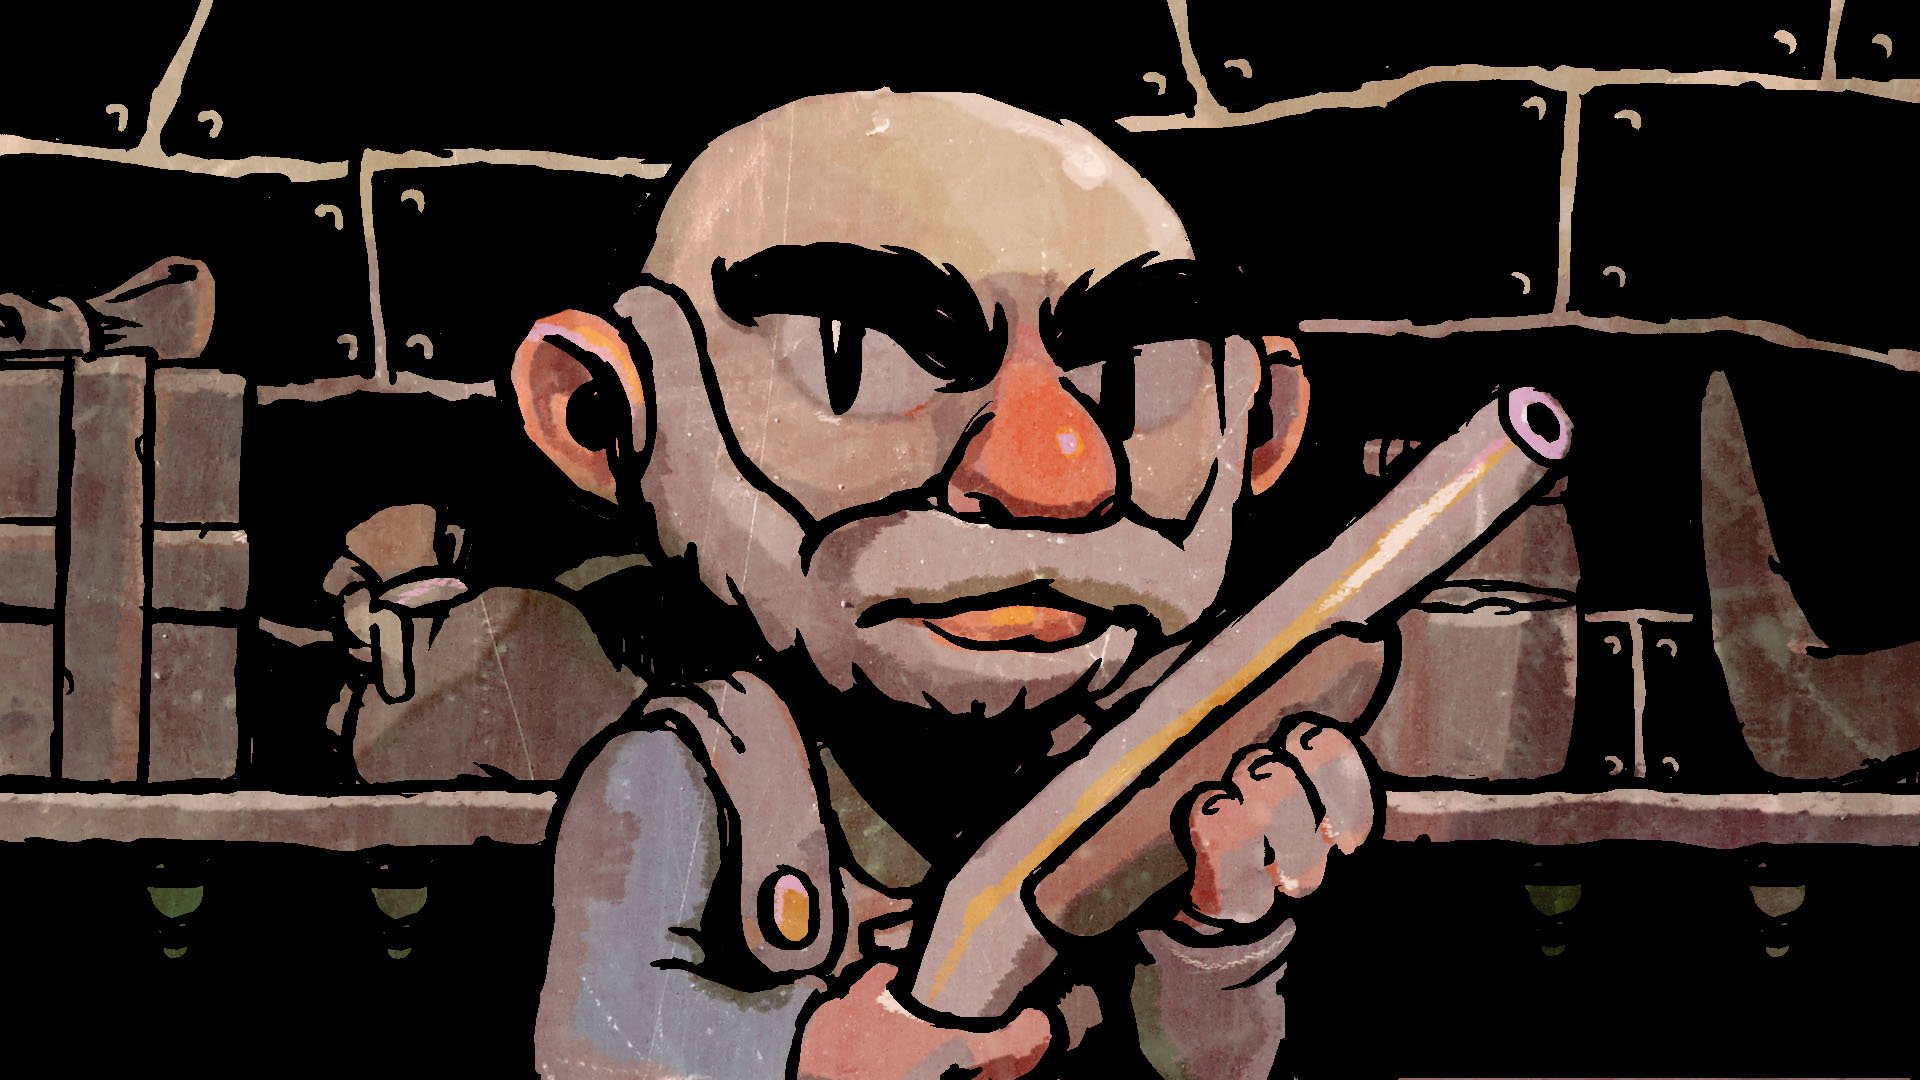 Spelunky HD Wallpaper Background Image Id